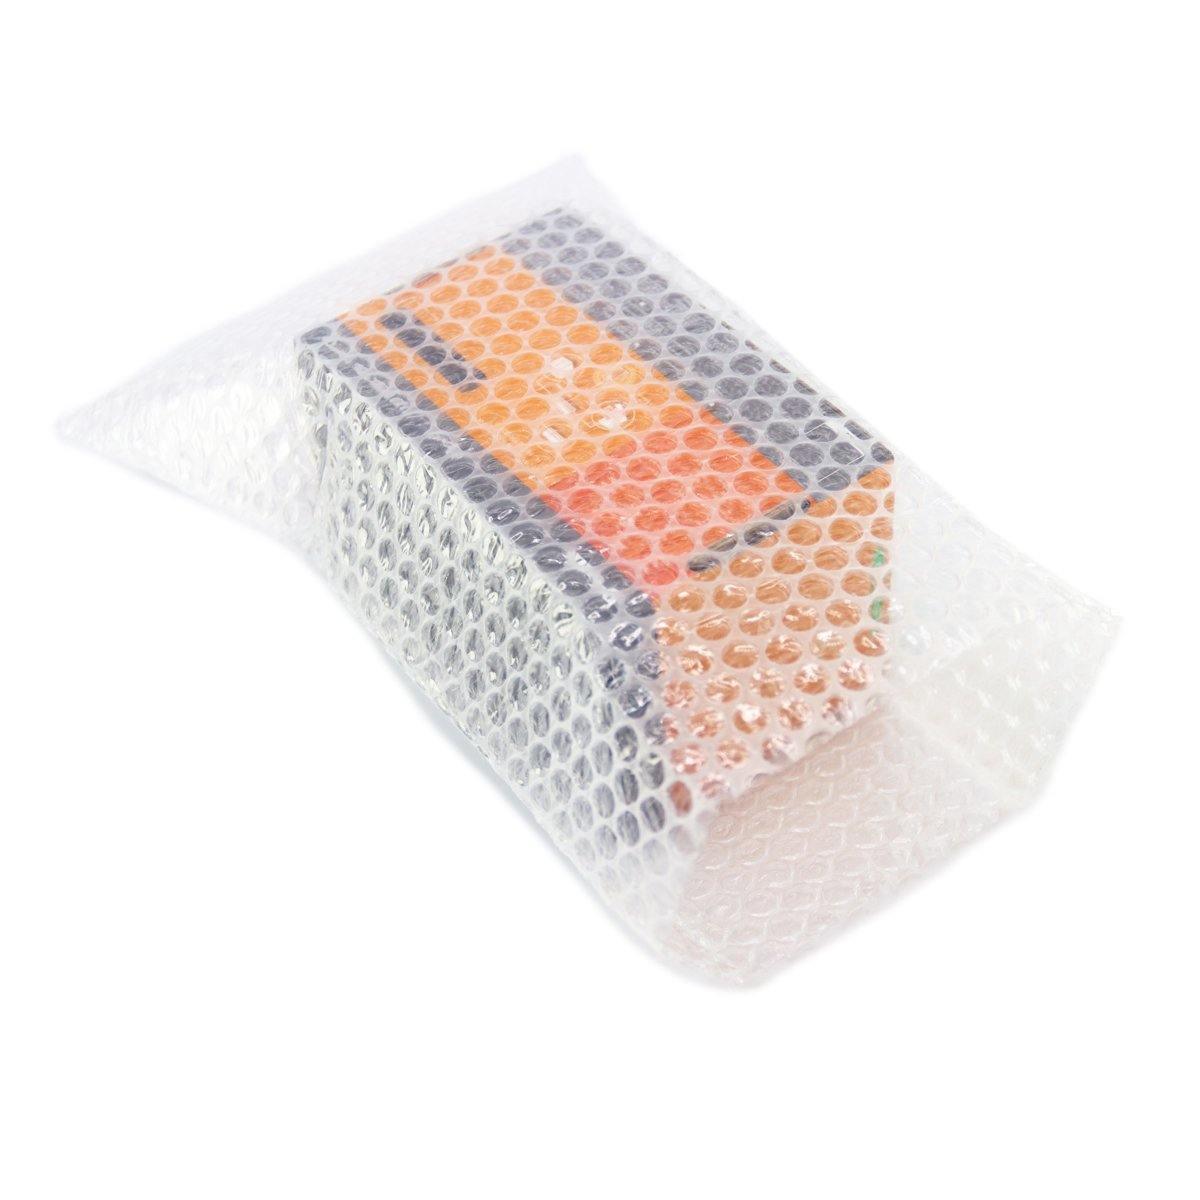 Bubble Pouch Bag 00 100mm x 180mm Clear BP00 Quality Import